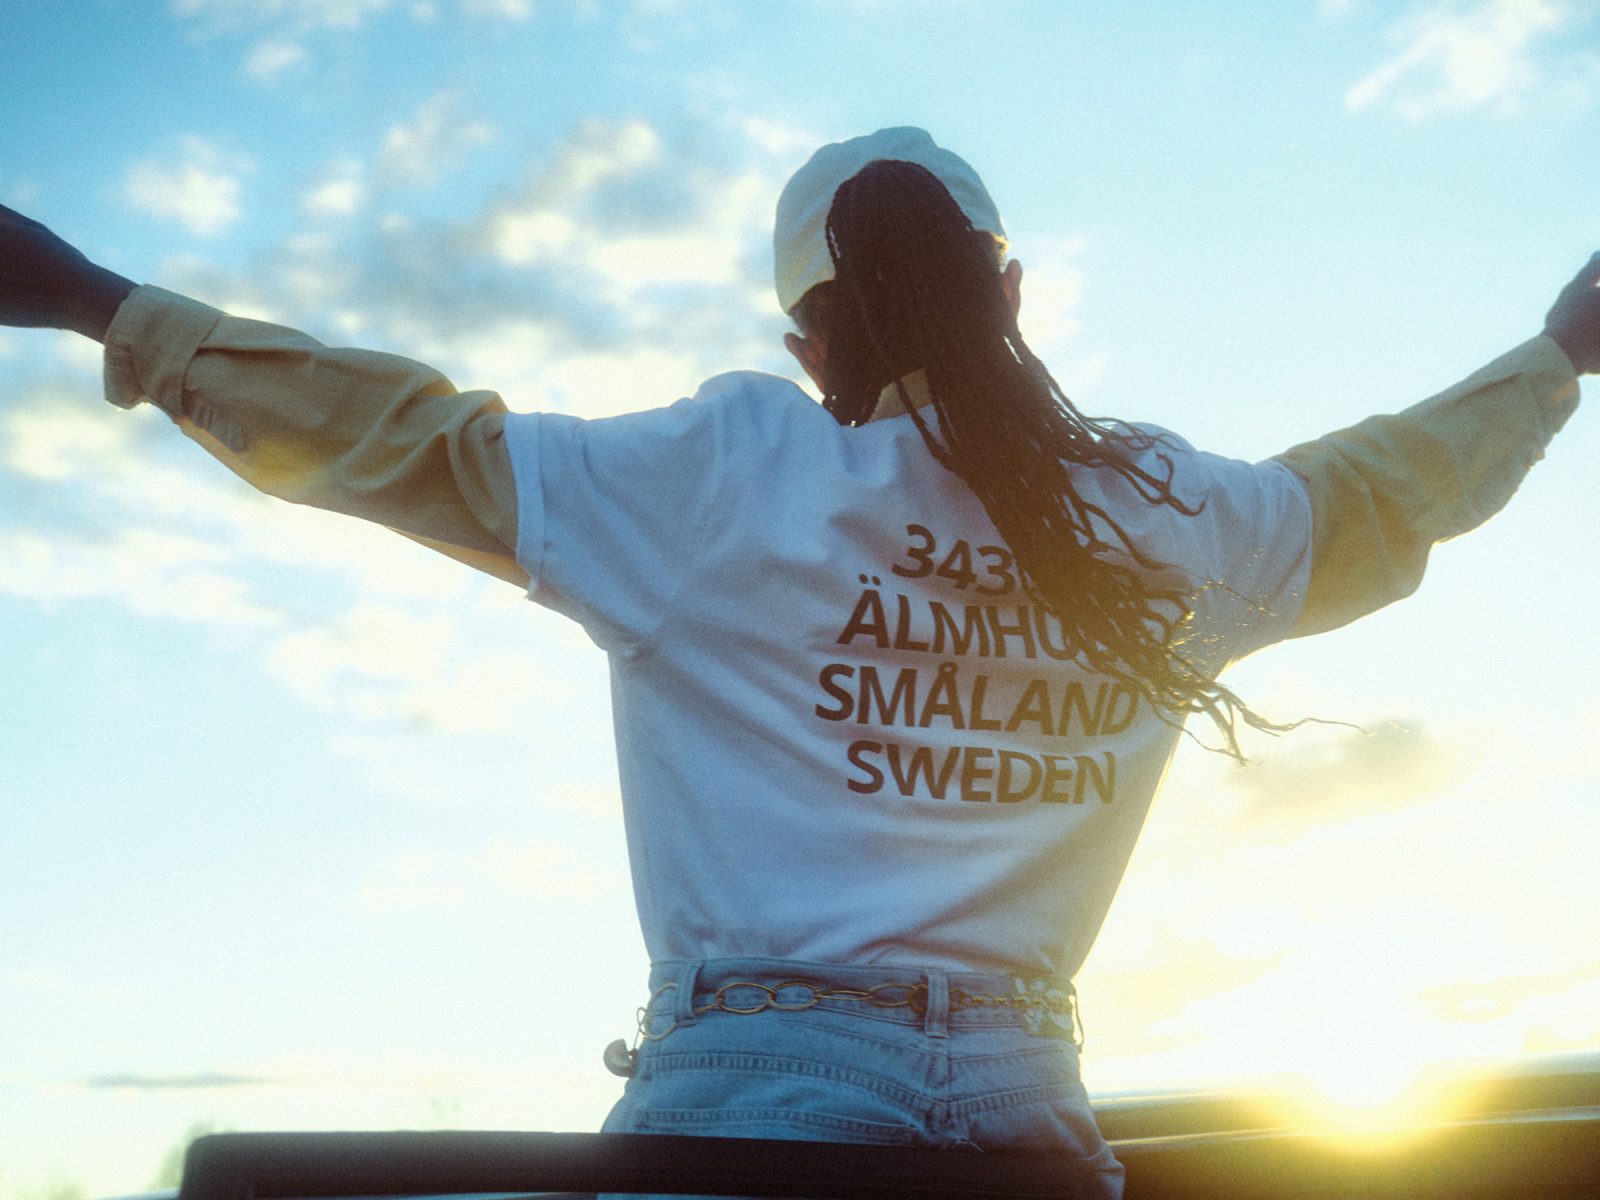 Woman leaning against an open car door from inside the car. She is dressed in baggy jeans and a t-shirt from IKEA Museums new collection 343 36. the t-shirt is white with black text: 343 36 ÄLMHULT SMÅLAND SWEDEN.